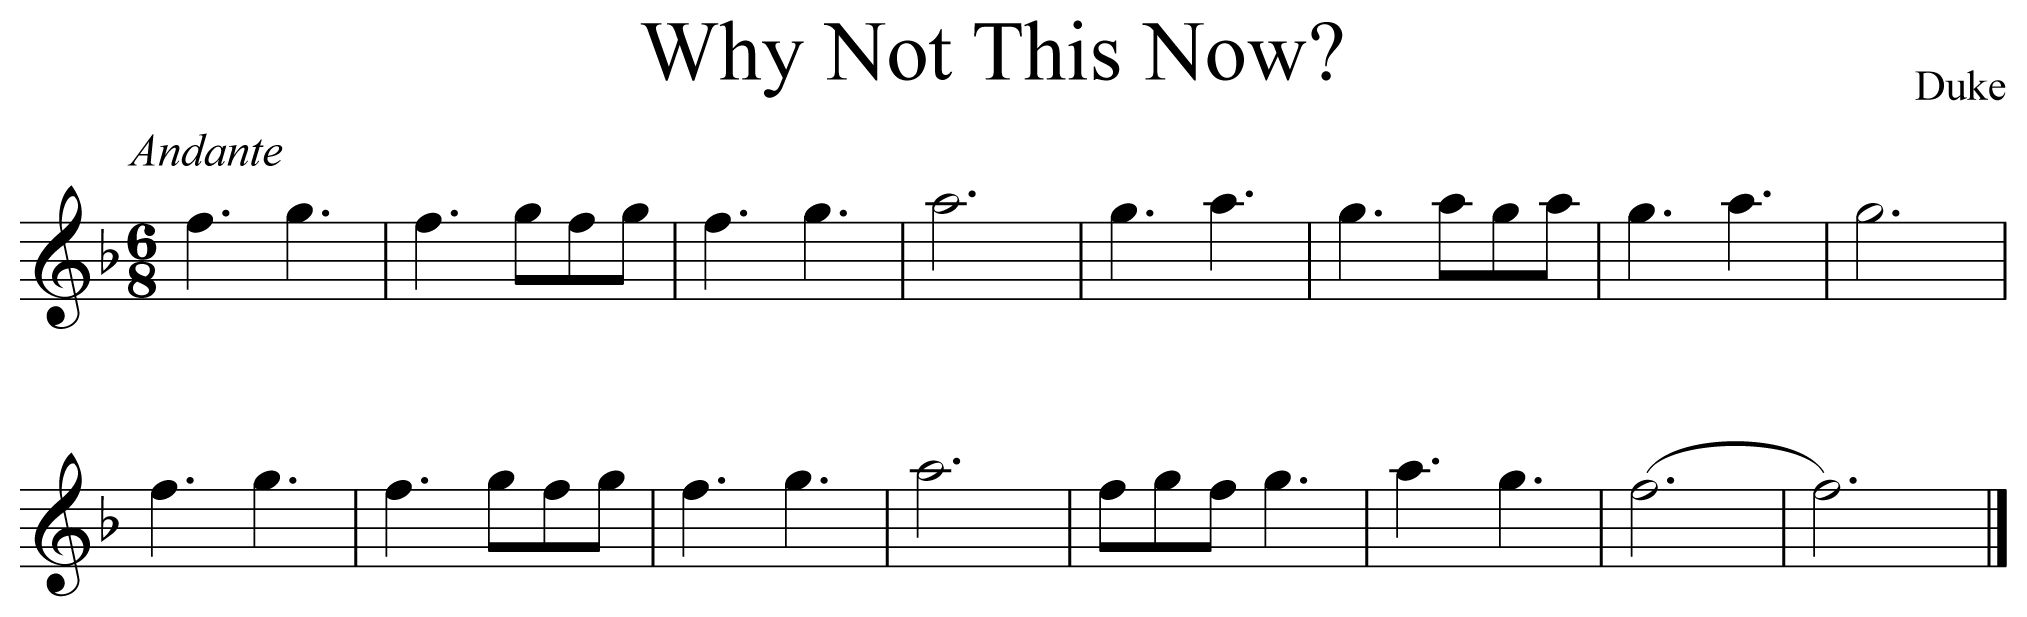 Why Not This Now Music Notation 